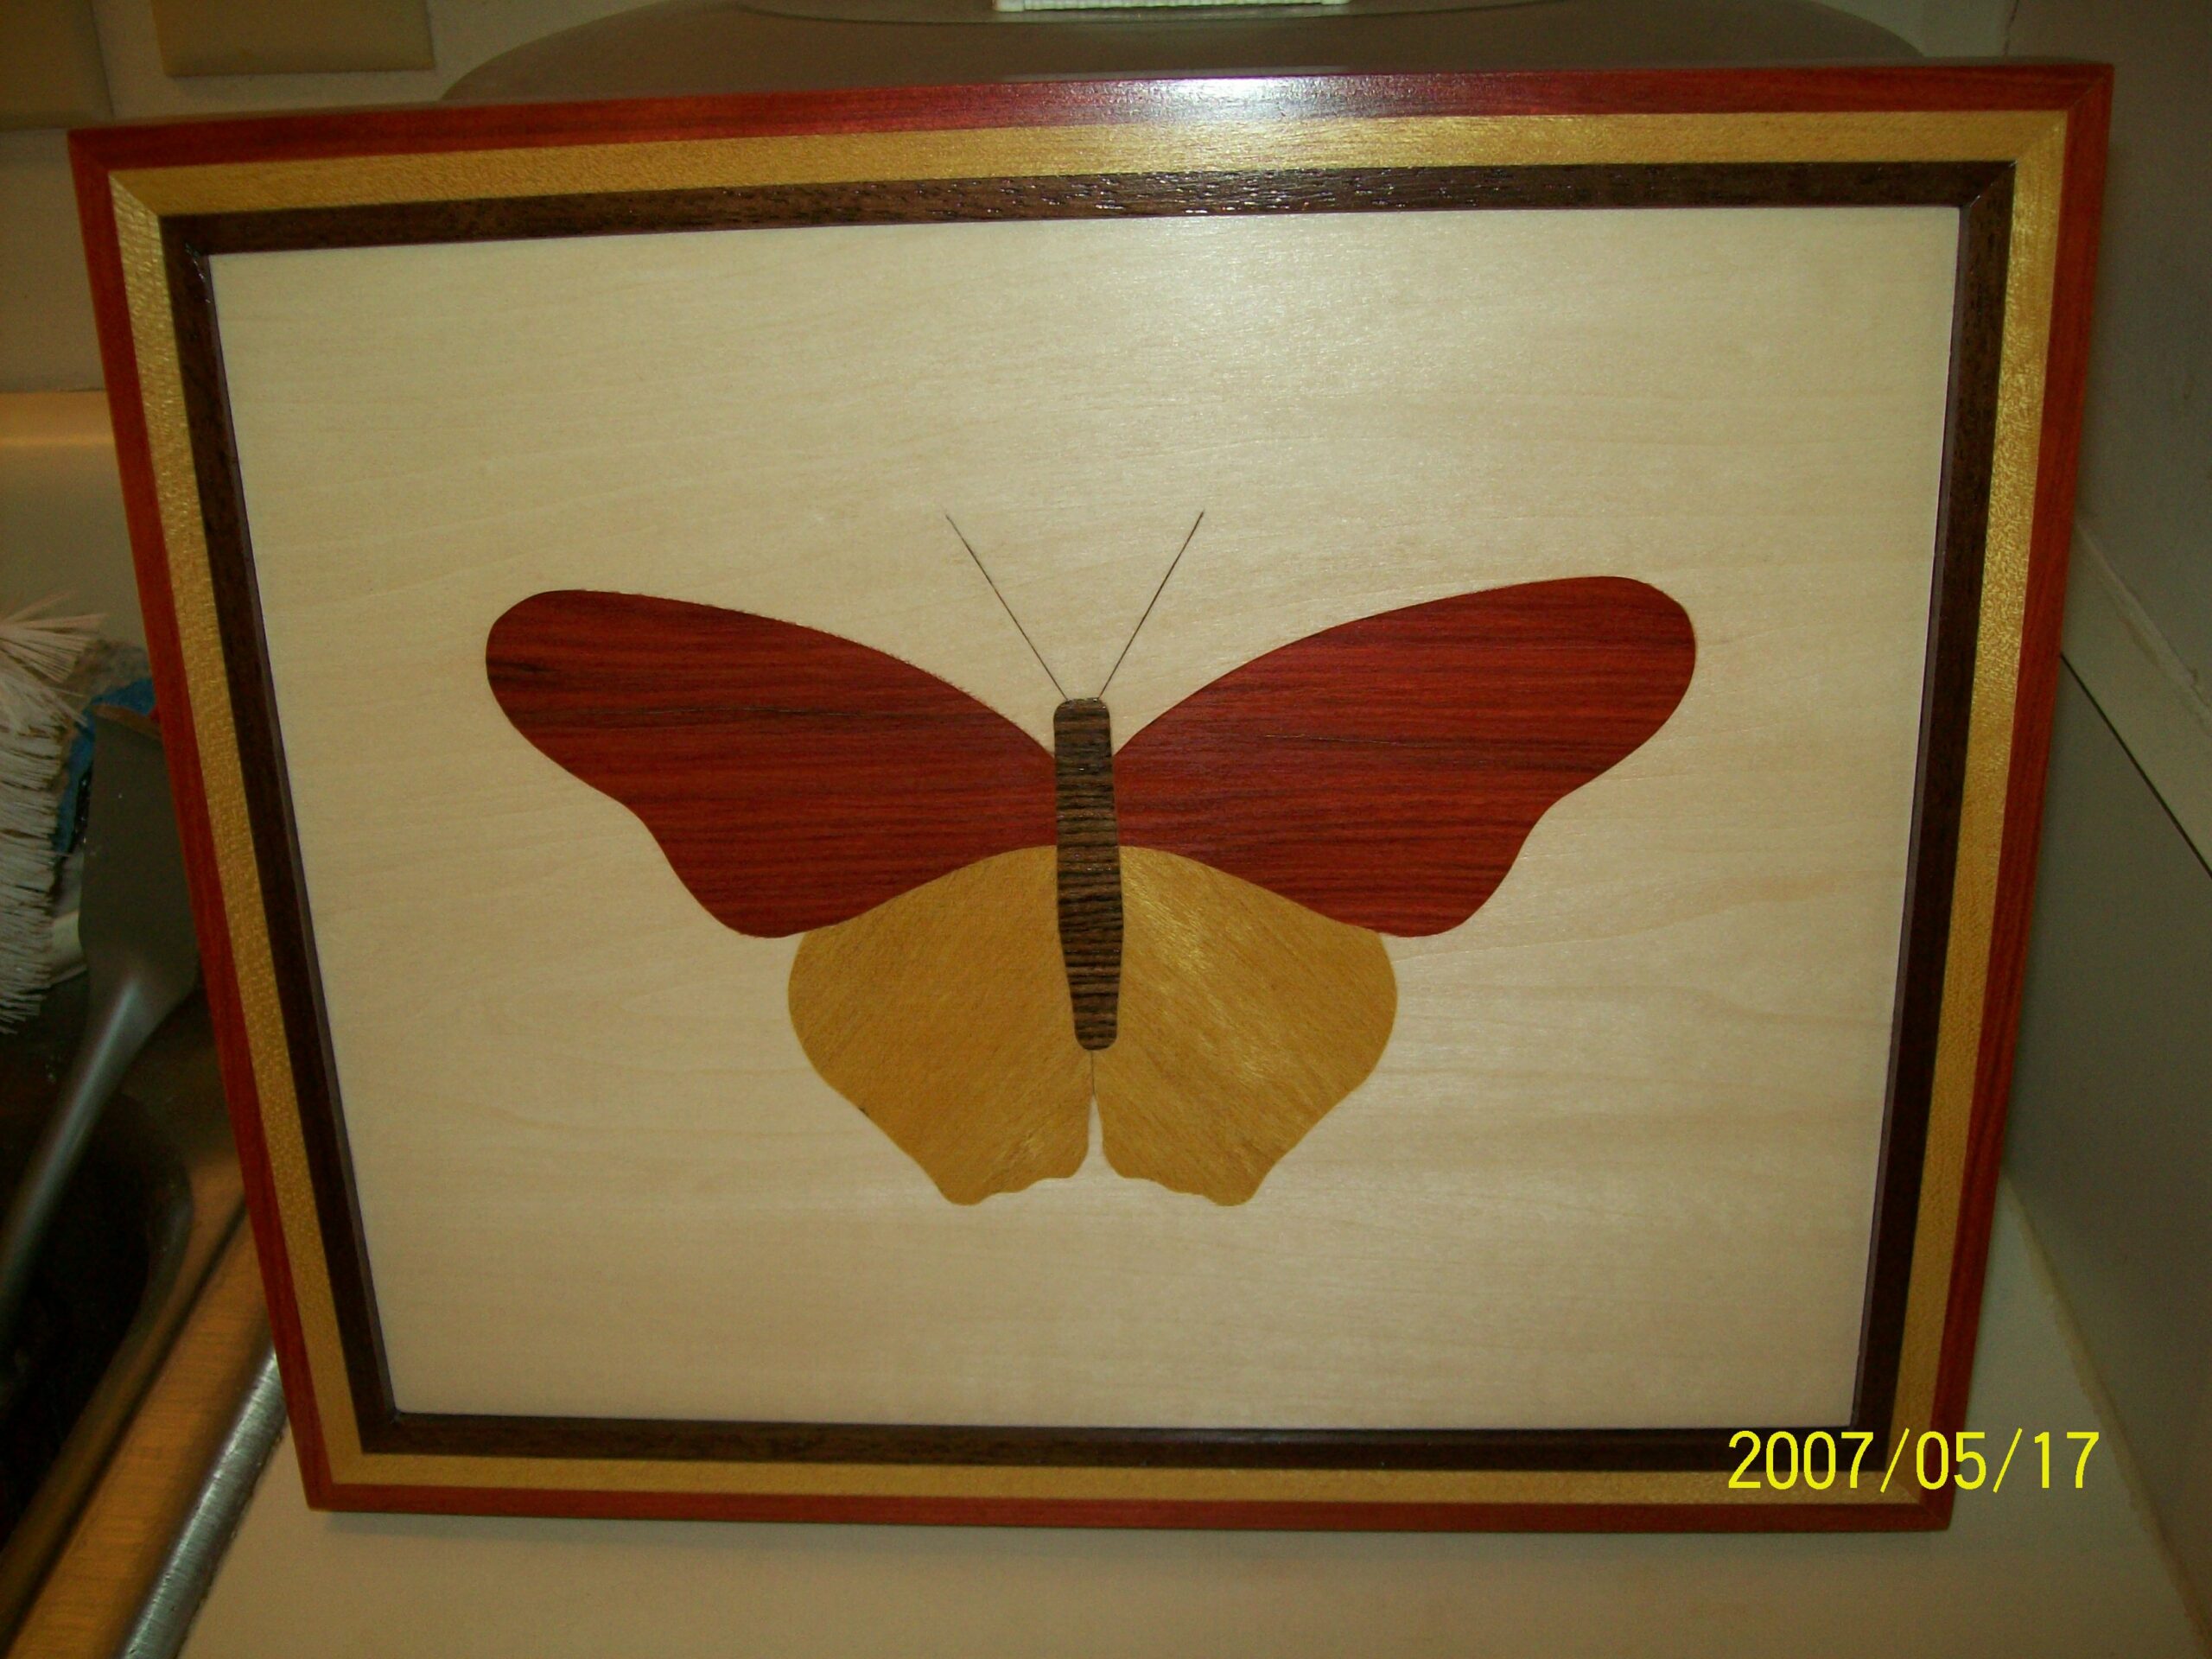 4″ Butterfly Wall Art by Jim M. from Garner, NC – 12/17/2014